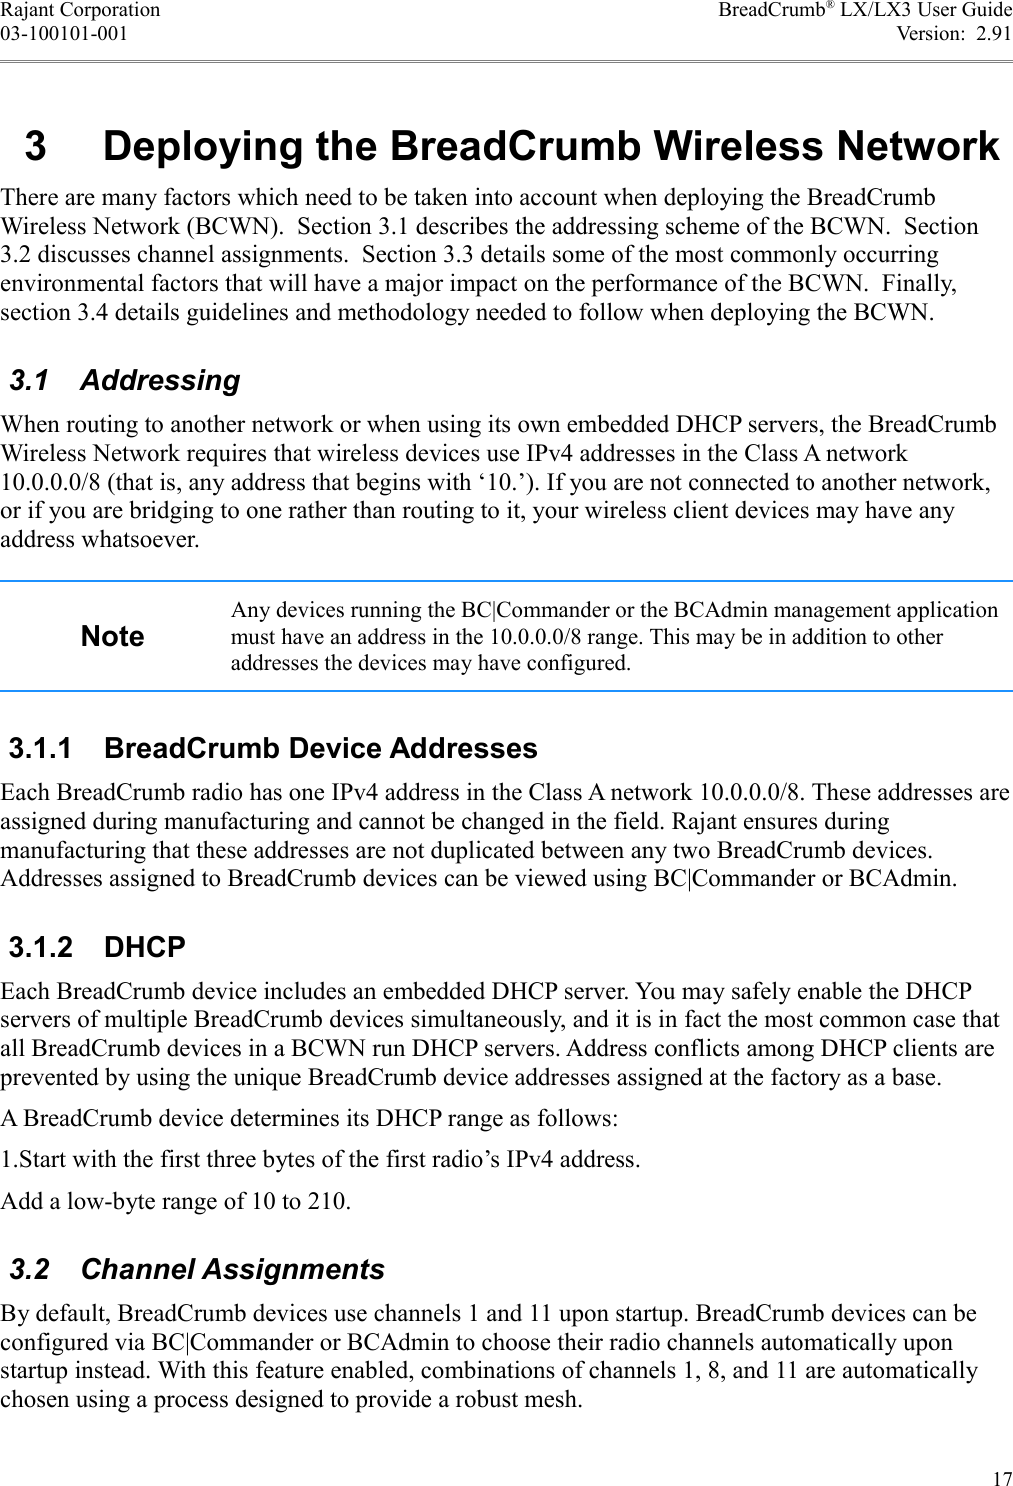 Rajant Corporation BreadCrumb® LX/LX3 User Guide03-100101-001 Version:  2.91 3  Deploying the BreadCrumb Wireless NetworkThere are many factors which need to be taken into account when deploying the BreadCrumb Wireless Network (BCWN).  Section 3.1 describes the addressing scheme of the BCWN.  Section 3.2 discusses channel assignments.  Section 3.3 details some of the most commonly occurring environmental factors that will have a major impact on the performance of the BCWN.  Finally, section 3.4 details guidelines and methodology needed to follow when deploying the BCWN. 3.1  AddressingWhen routing to another network or when using its own embedded DHCP servers, the BreadCrumb Wireless Network requires that wireless devices use IPv4 addresses in the Class A network 10.0.0.0/8 (that is, any address that begins with ‘10.’). If you are not connected to another network, or if you are bridging to one rather than routing to it, your wireless client devices may have any address whatsoever.NoteAny devices running the BC|Commander or the BCAdmin management application must have an address in the 10.0.0.0/8 range. This may be in addition to other addresses the devices may have configured. 3.1.1  BreadCrumb Device AddressesEach BreadCrumb radio has one IPv4 address in the Class A network 10.0.0.0/8. These addresses are assigned during manufacturing and cannot be changed in the field. Rajant ensures during manufacturing that these addresses are not duplicated between any two BreadCrumb devices. Addresses assigned to BreadCrumb devices can be viewed using BC|Commander or BCAdmin. 3.1.2  DHCPEach BreadCrumb device includes an embedded DHCP server. You may safely enable the DHCP servers of multiple BreadCrumb devices simultaneously, and it is in fact the most common case that all BreadCrumb devices in a BCWN run DHCP servers. Address conflicts among DHCP clients are prevented by using the unique BreadCrumb device addresses assigned at the factory as a base.A BreadCrumb device determines its DHCP range as follows:1.Start with the first three bytes of the first radio’s IPv4 address.Add a low-byte range of 10 to 210. 3.2  Channel AssignmentsBy default, BreadCrumb devices use channels 1 and 11 upon startup. BreadCrumb devices can be configured via BC|Commander or BCAdmin to choose their radio channels automatically upon startup instead. With this feature enabled, combinations of channels 1, 8, and 11 are automatically chosen using a process designed to provide a robust mesh.17